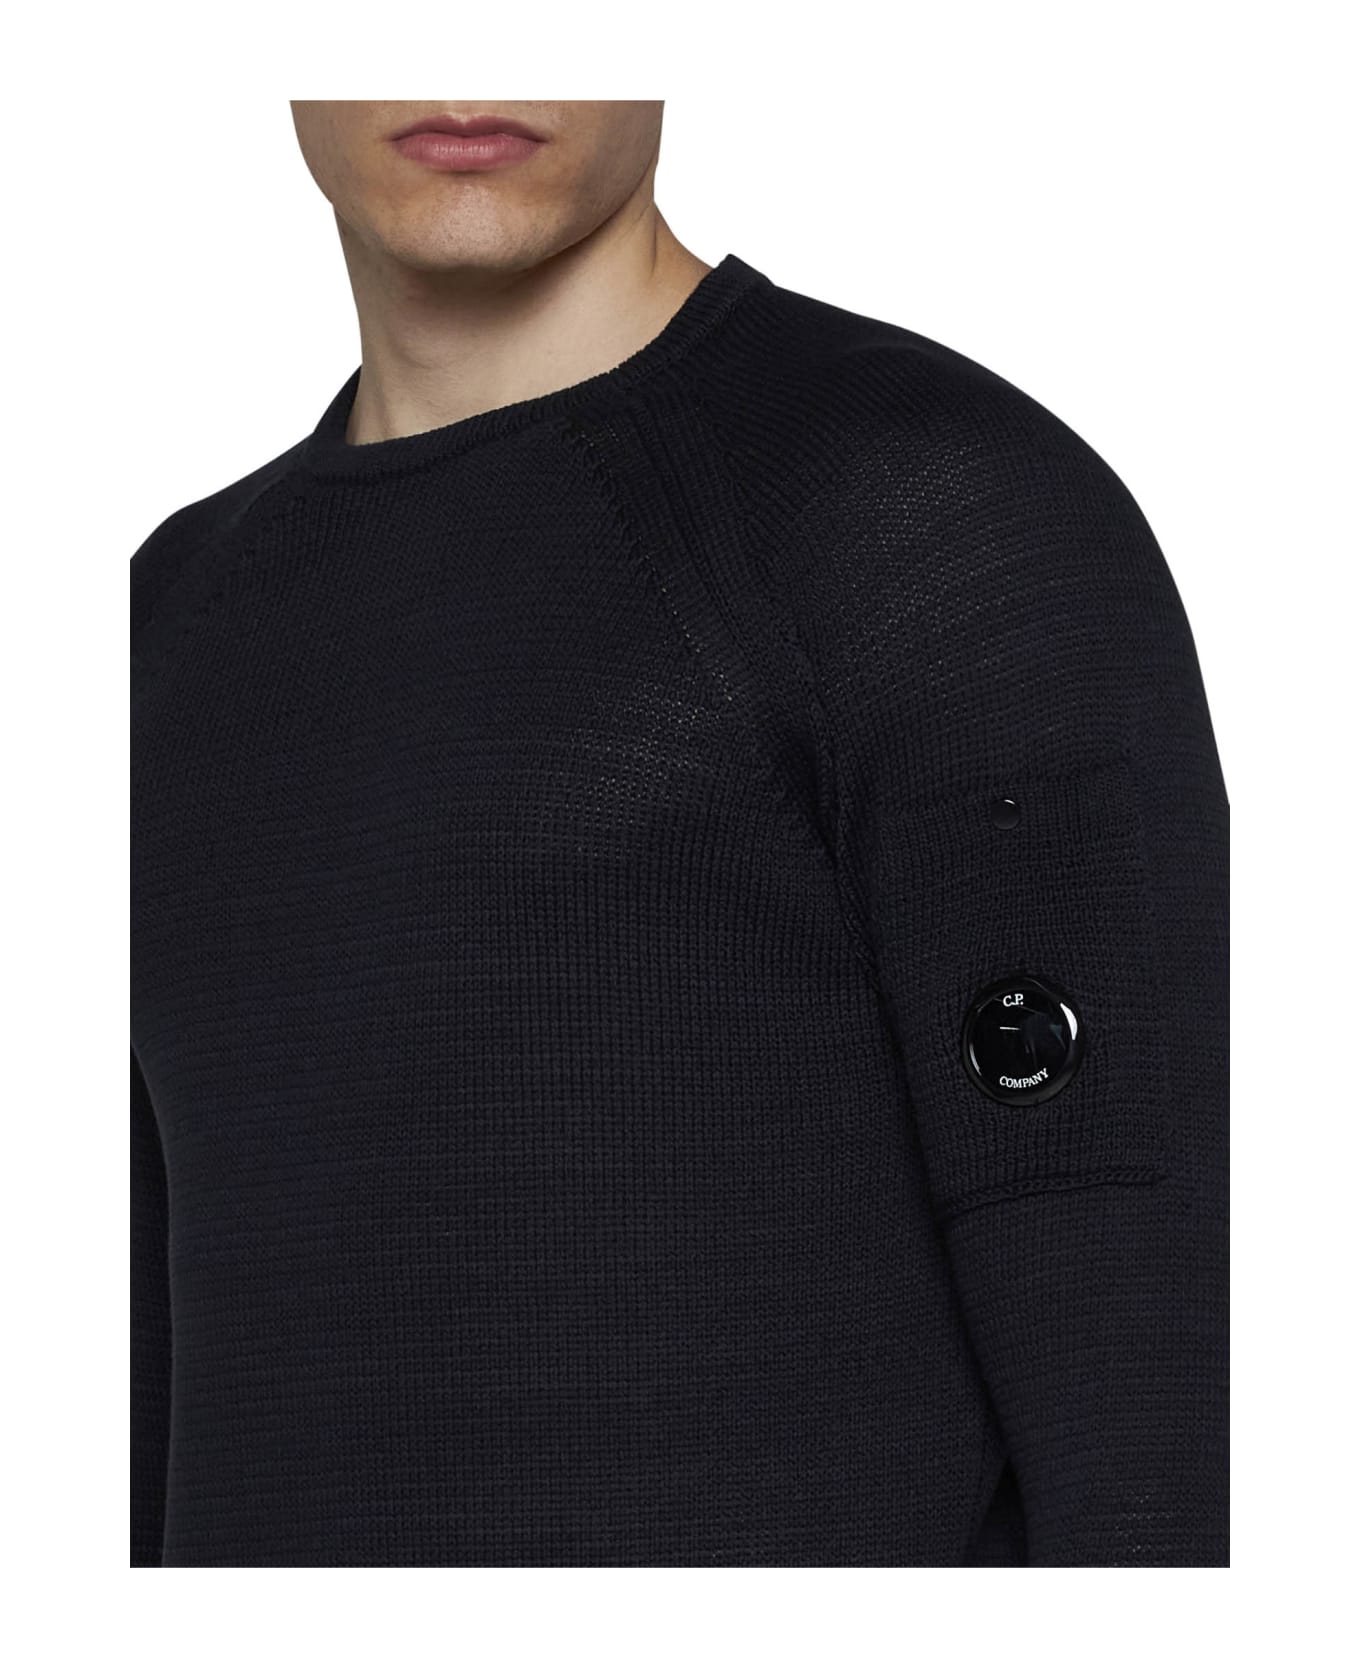 C.P. Company Sweater - Total eclipse